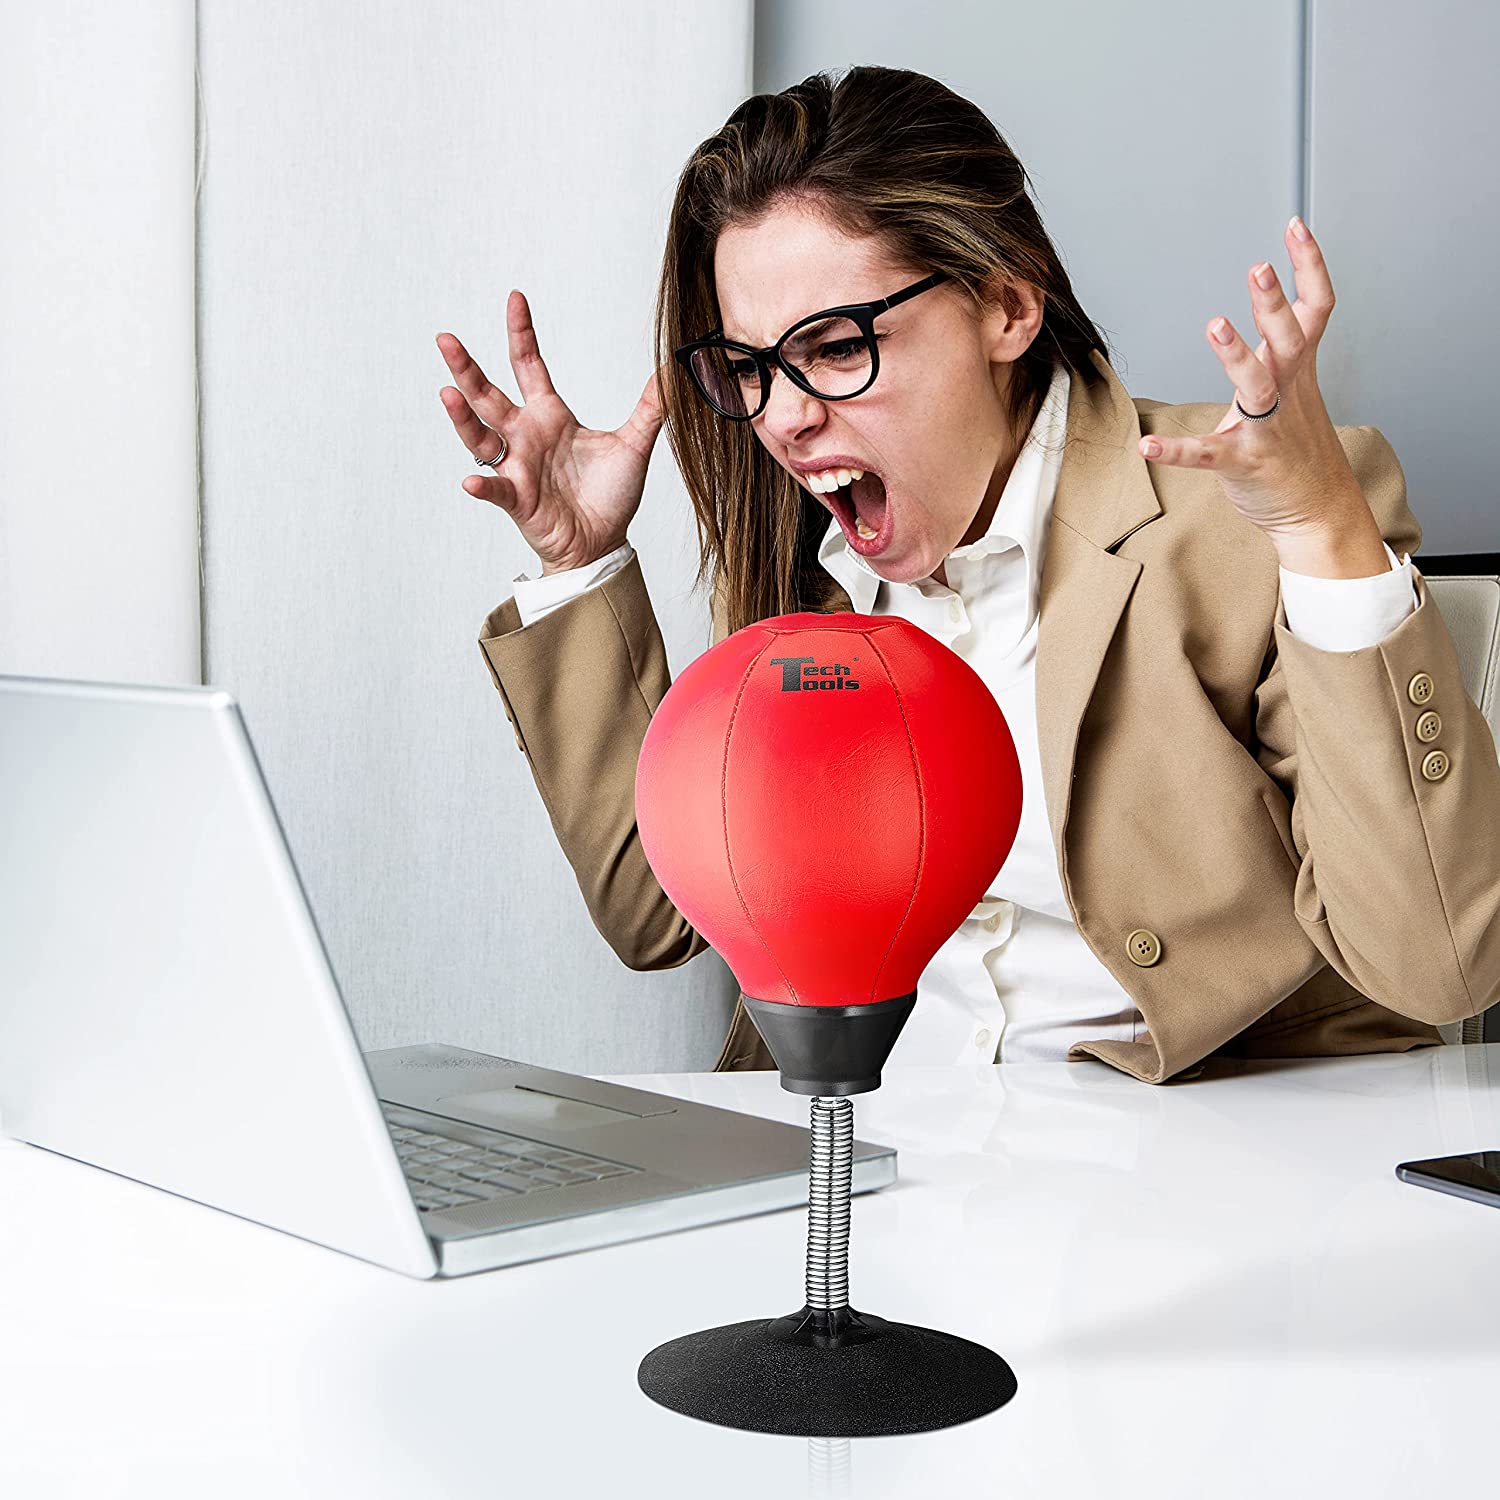 An angry woman in front of a laptop has a desktop punching bag next to her.